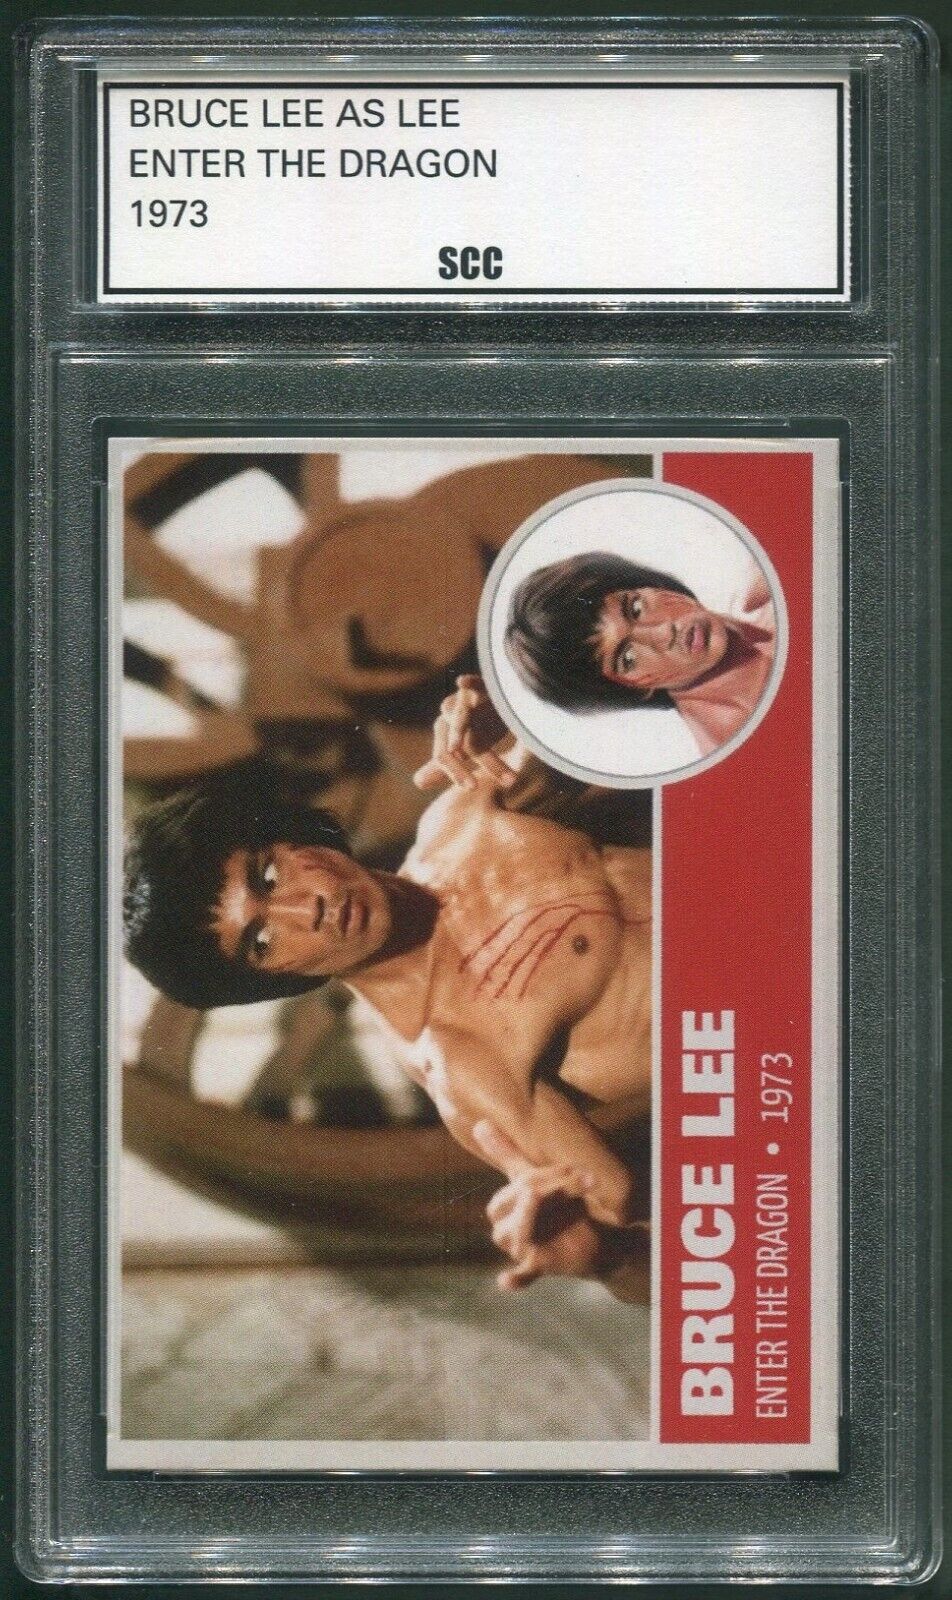 Custom 1973 Enter The Dragon Movie Trading Card Bruce Lee as Lee